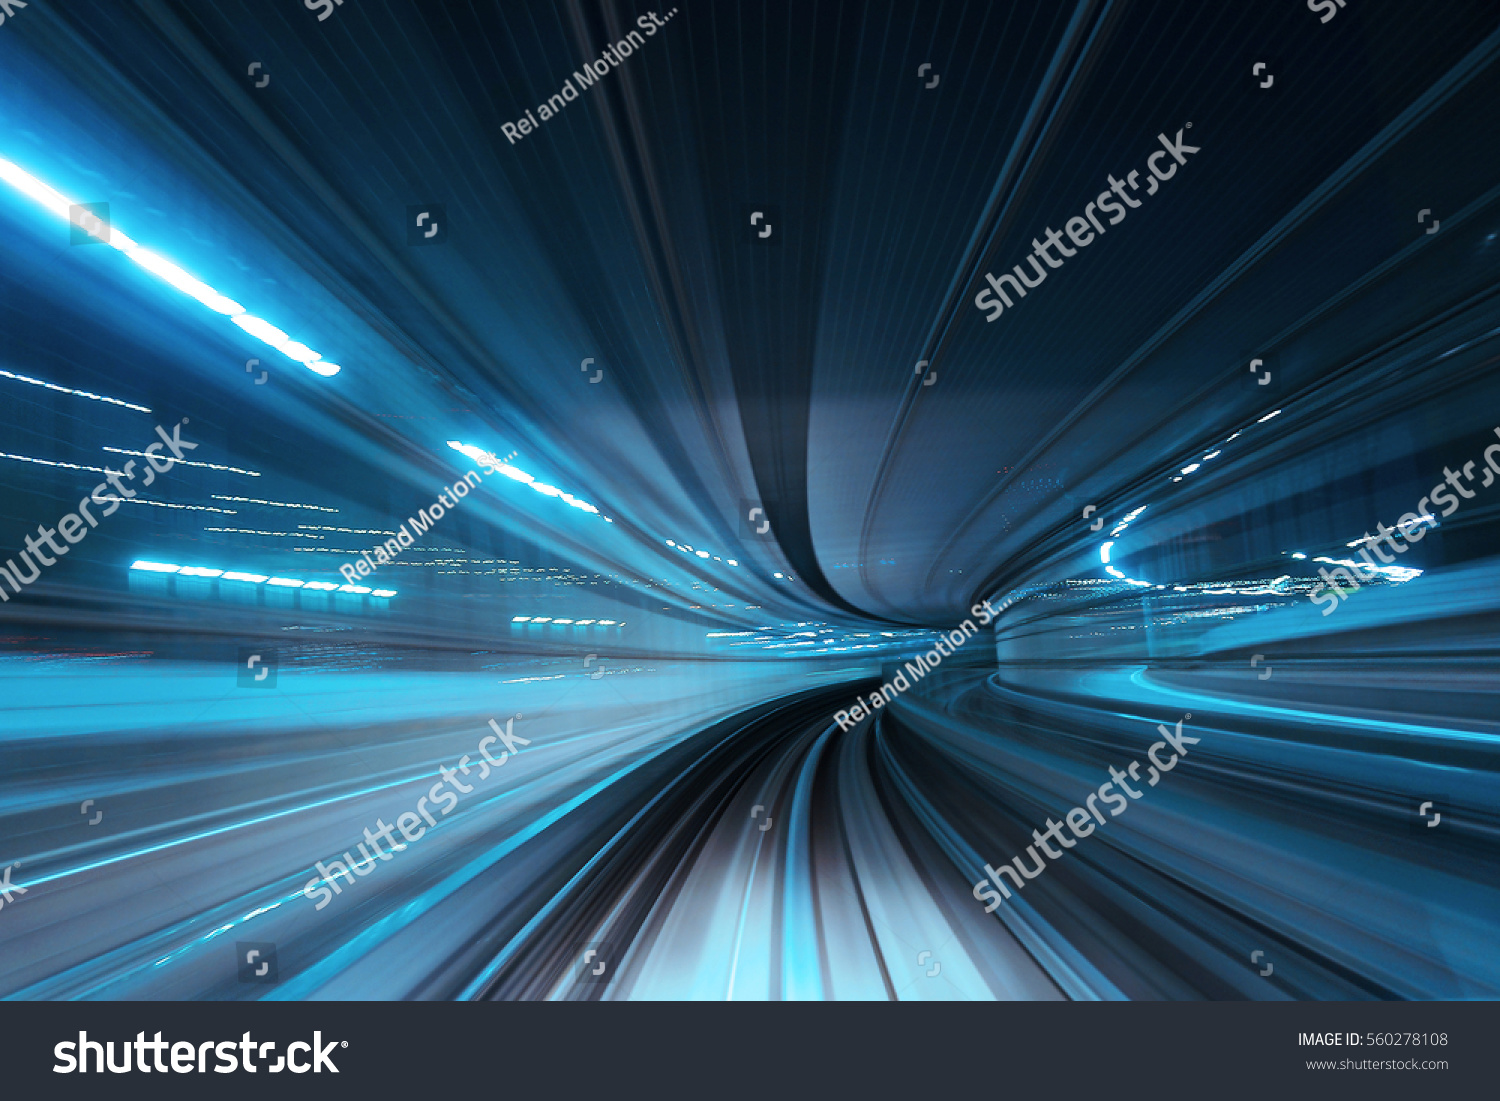 Motion blur of train moving inside tunnel #560278108